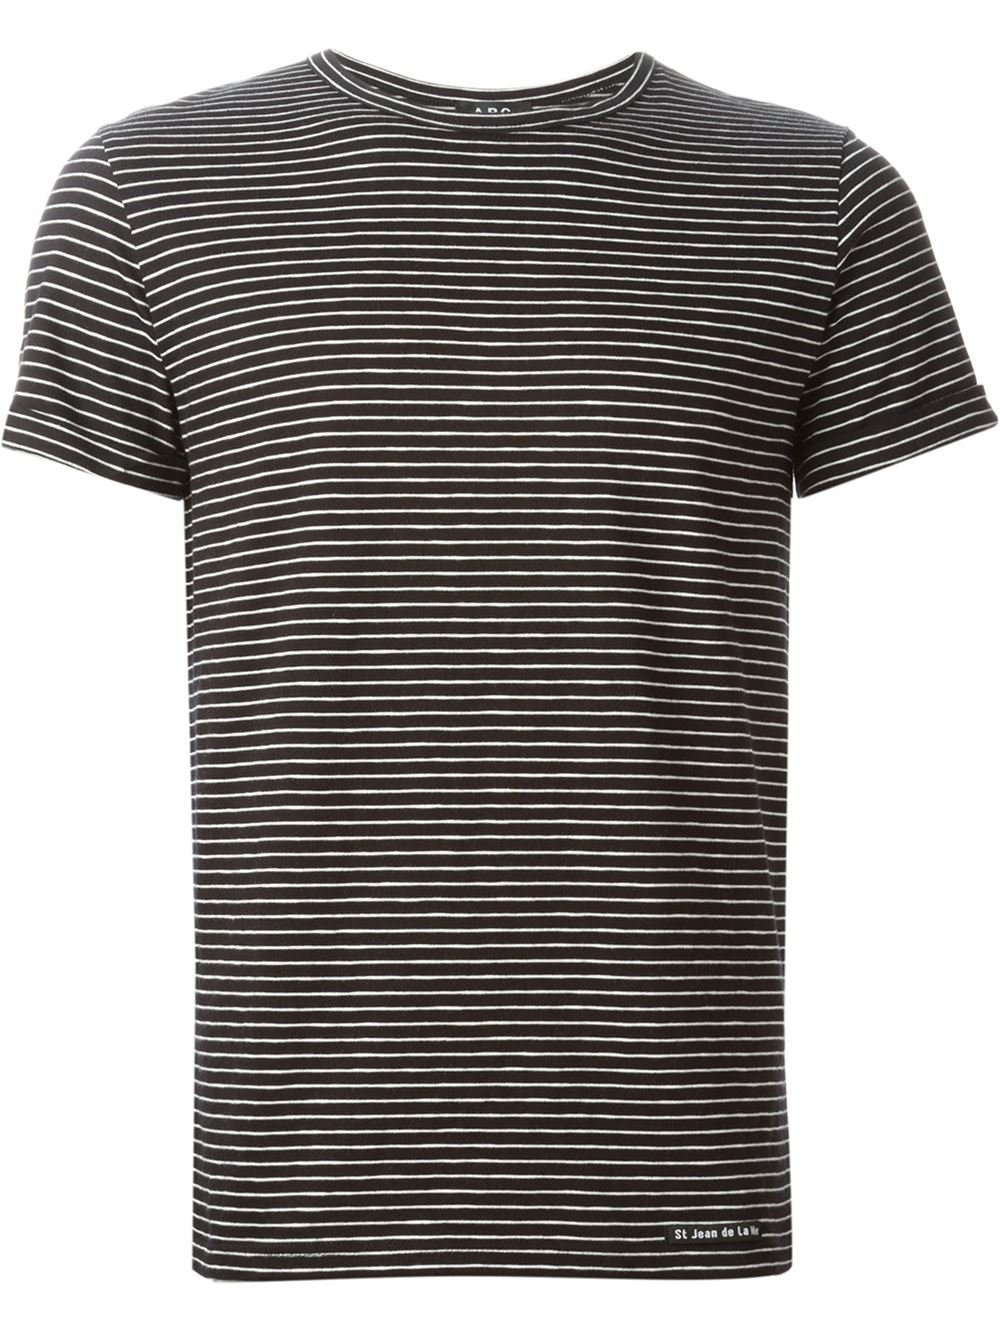 Lyst - A.P.C. Striped T-Shirt in Black for Men